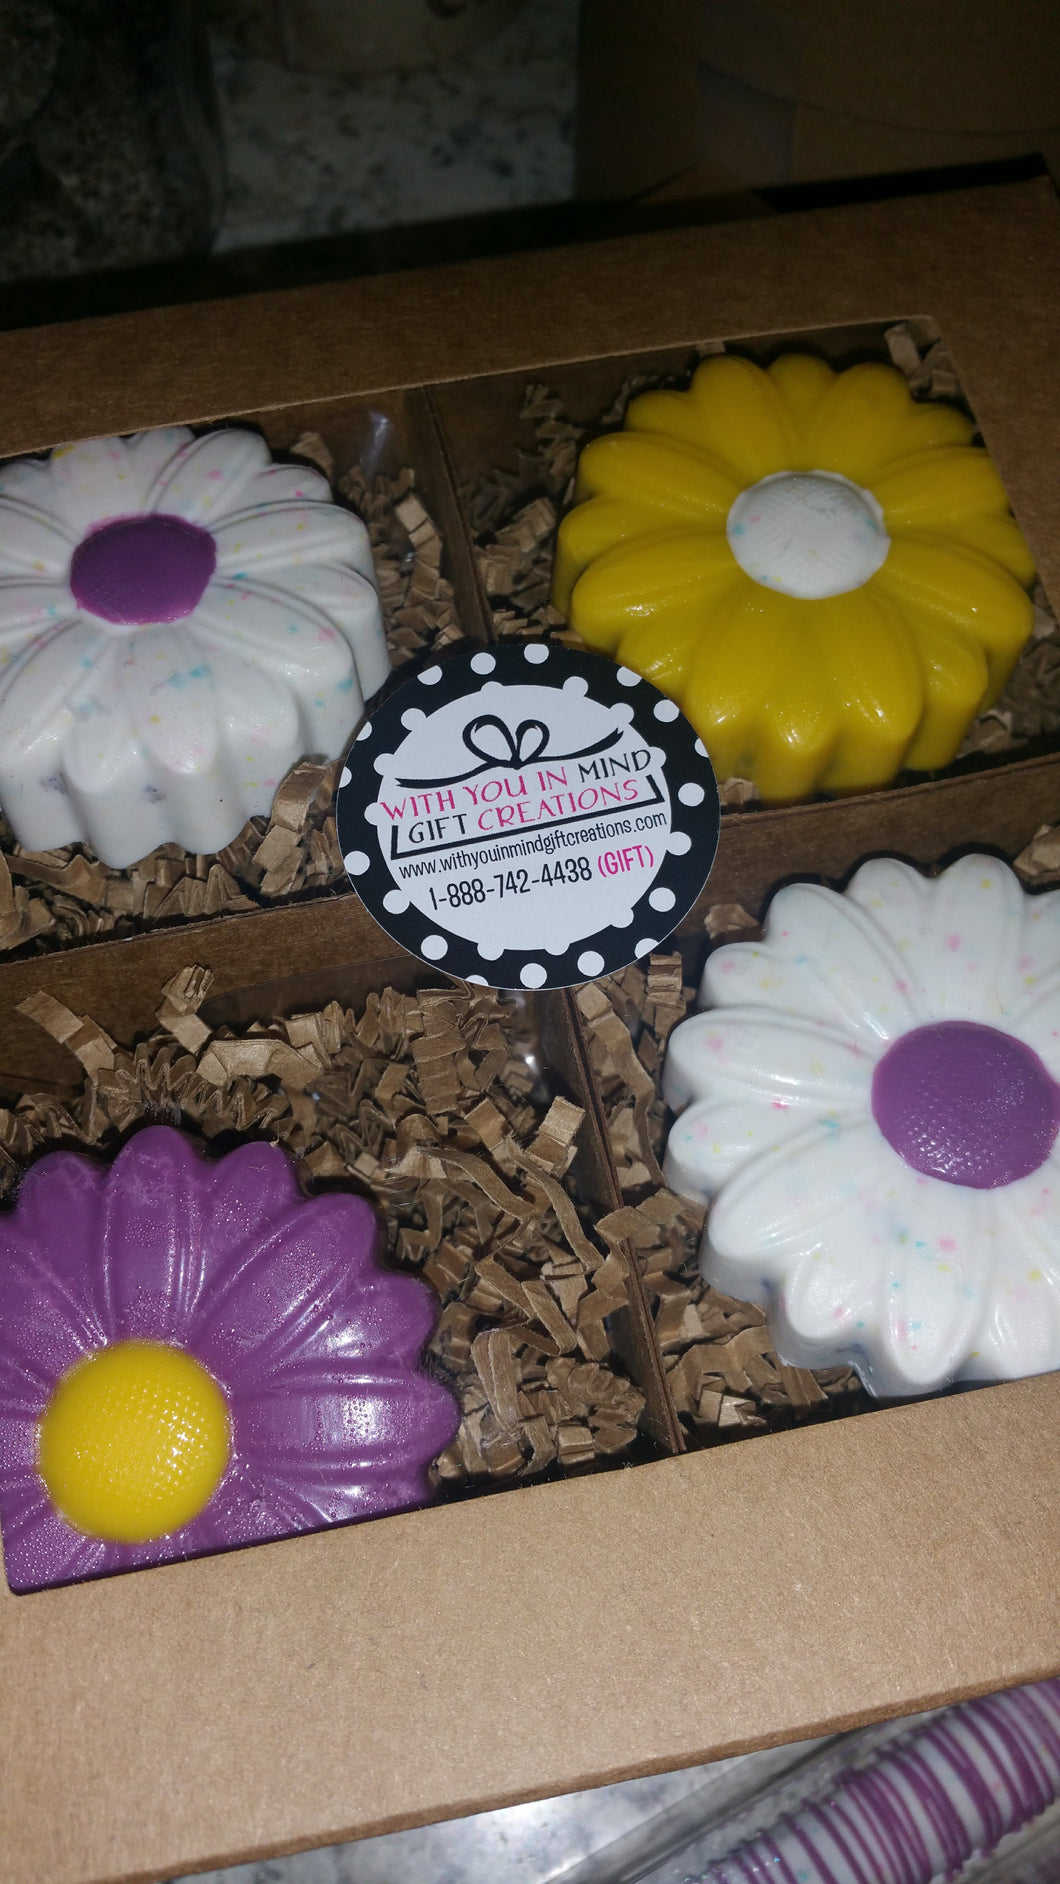 Oreo Cookies - Chocolate Covered/Dipped - 4 pc Box (Daisy Sunflower)